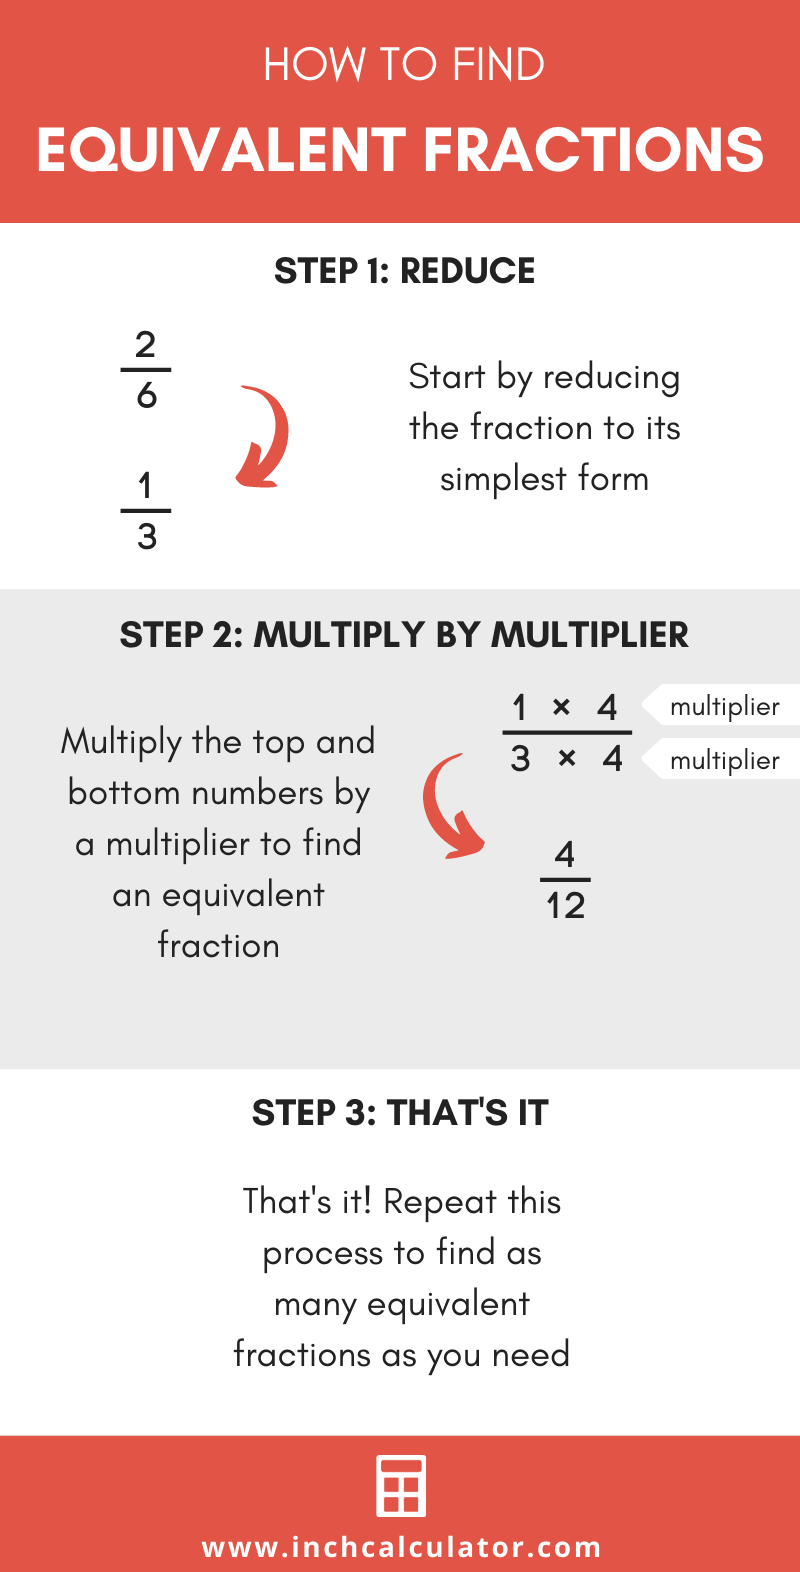 Infographic showing the steps to calculate equivalent fractions